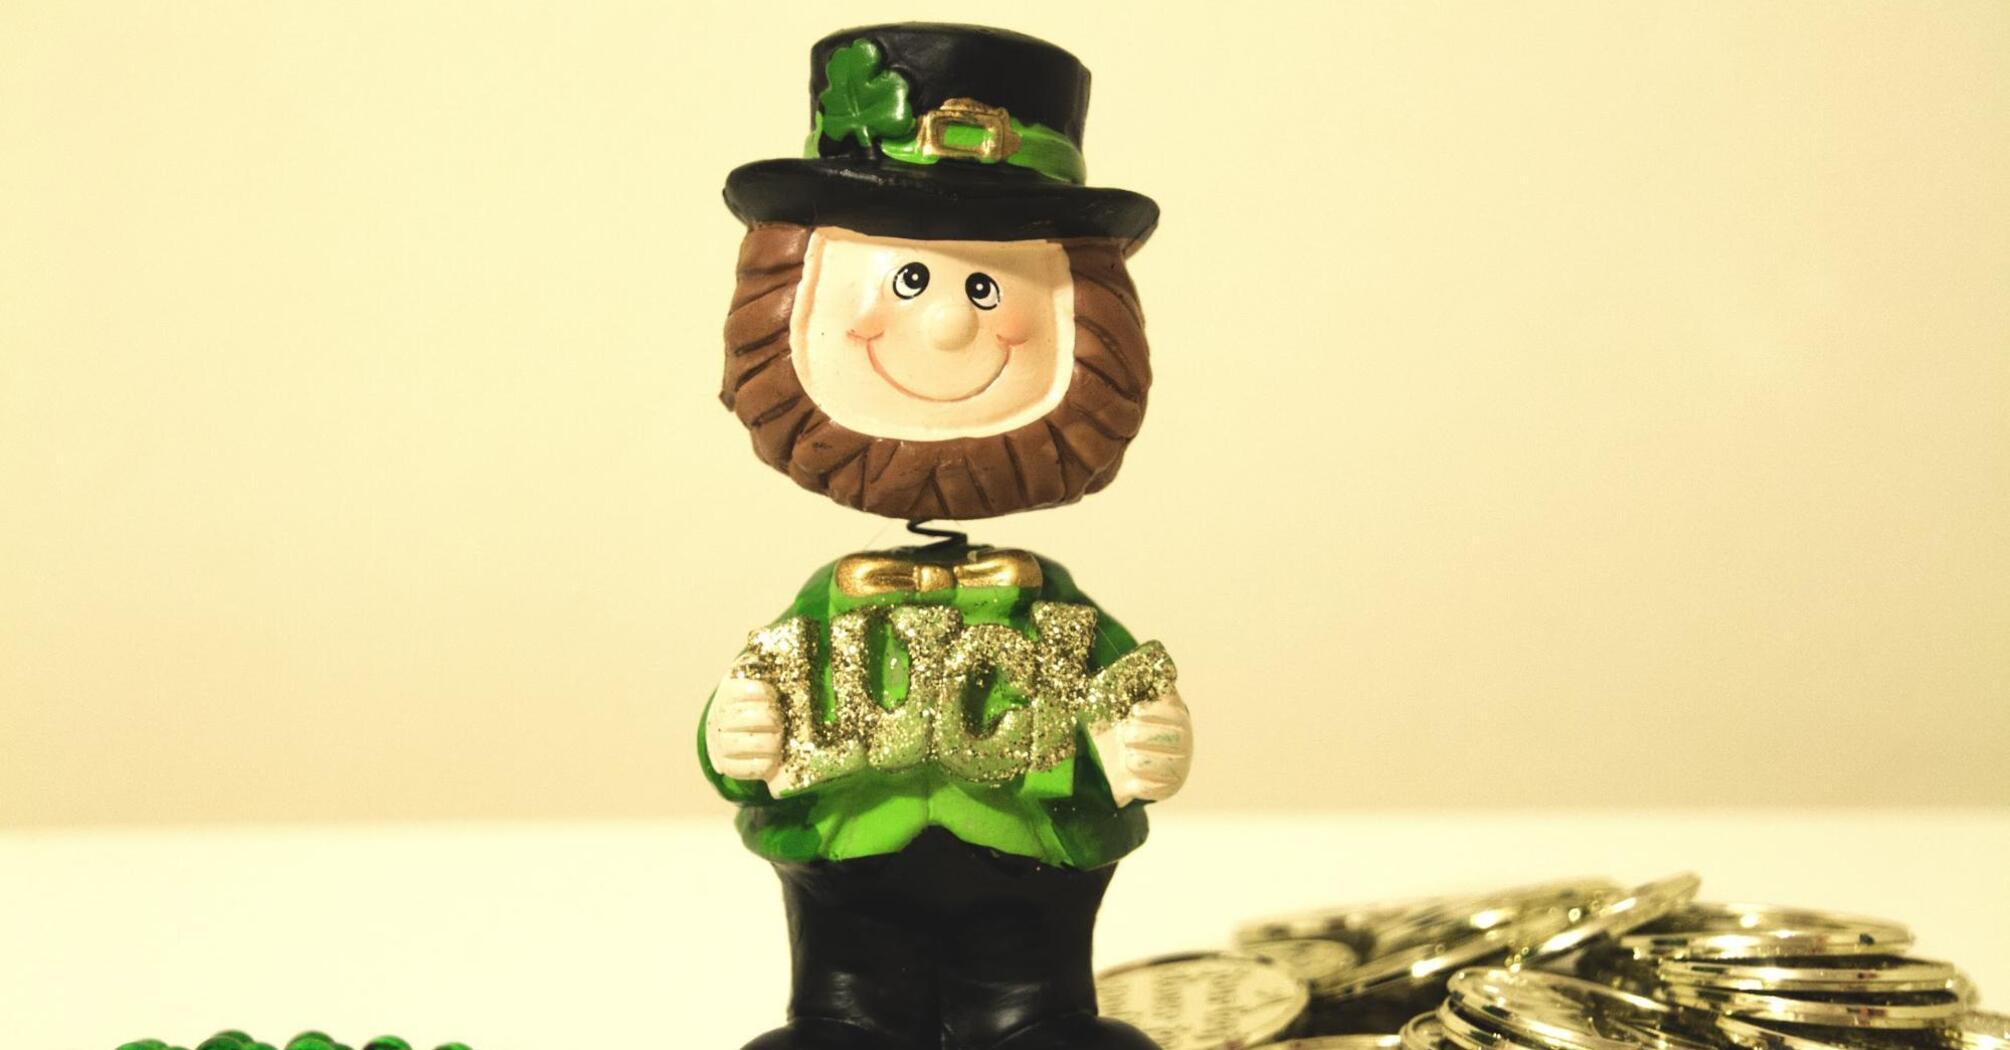 Cute statue-symbol of St. Patrick's day